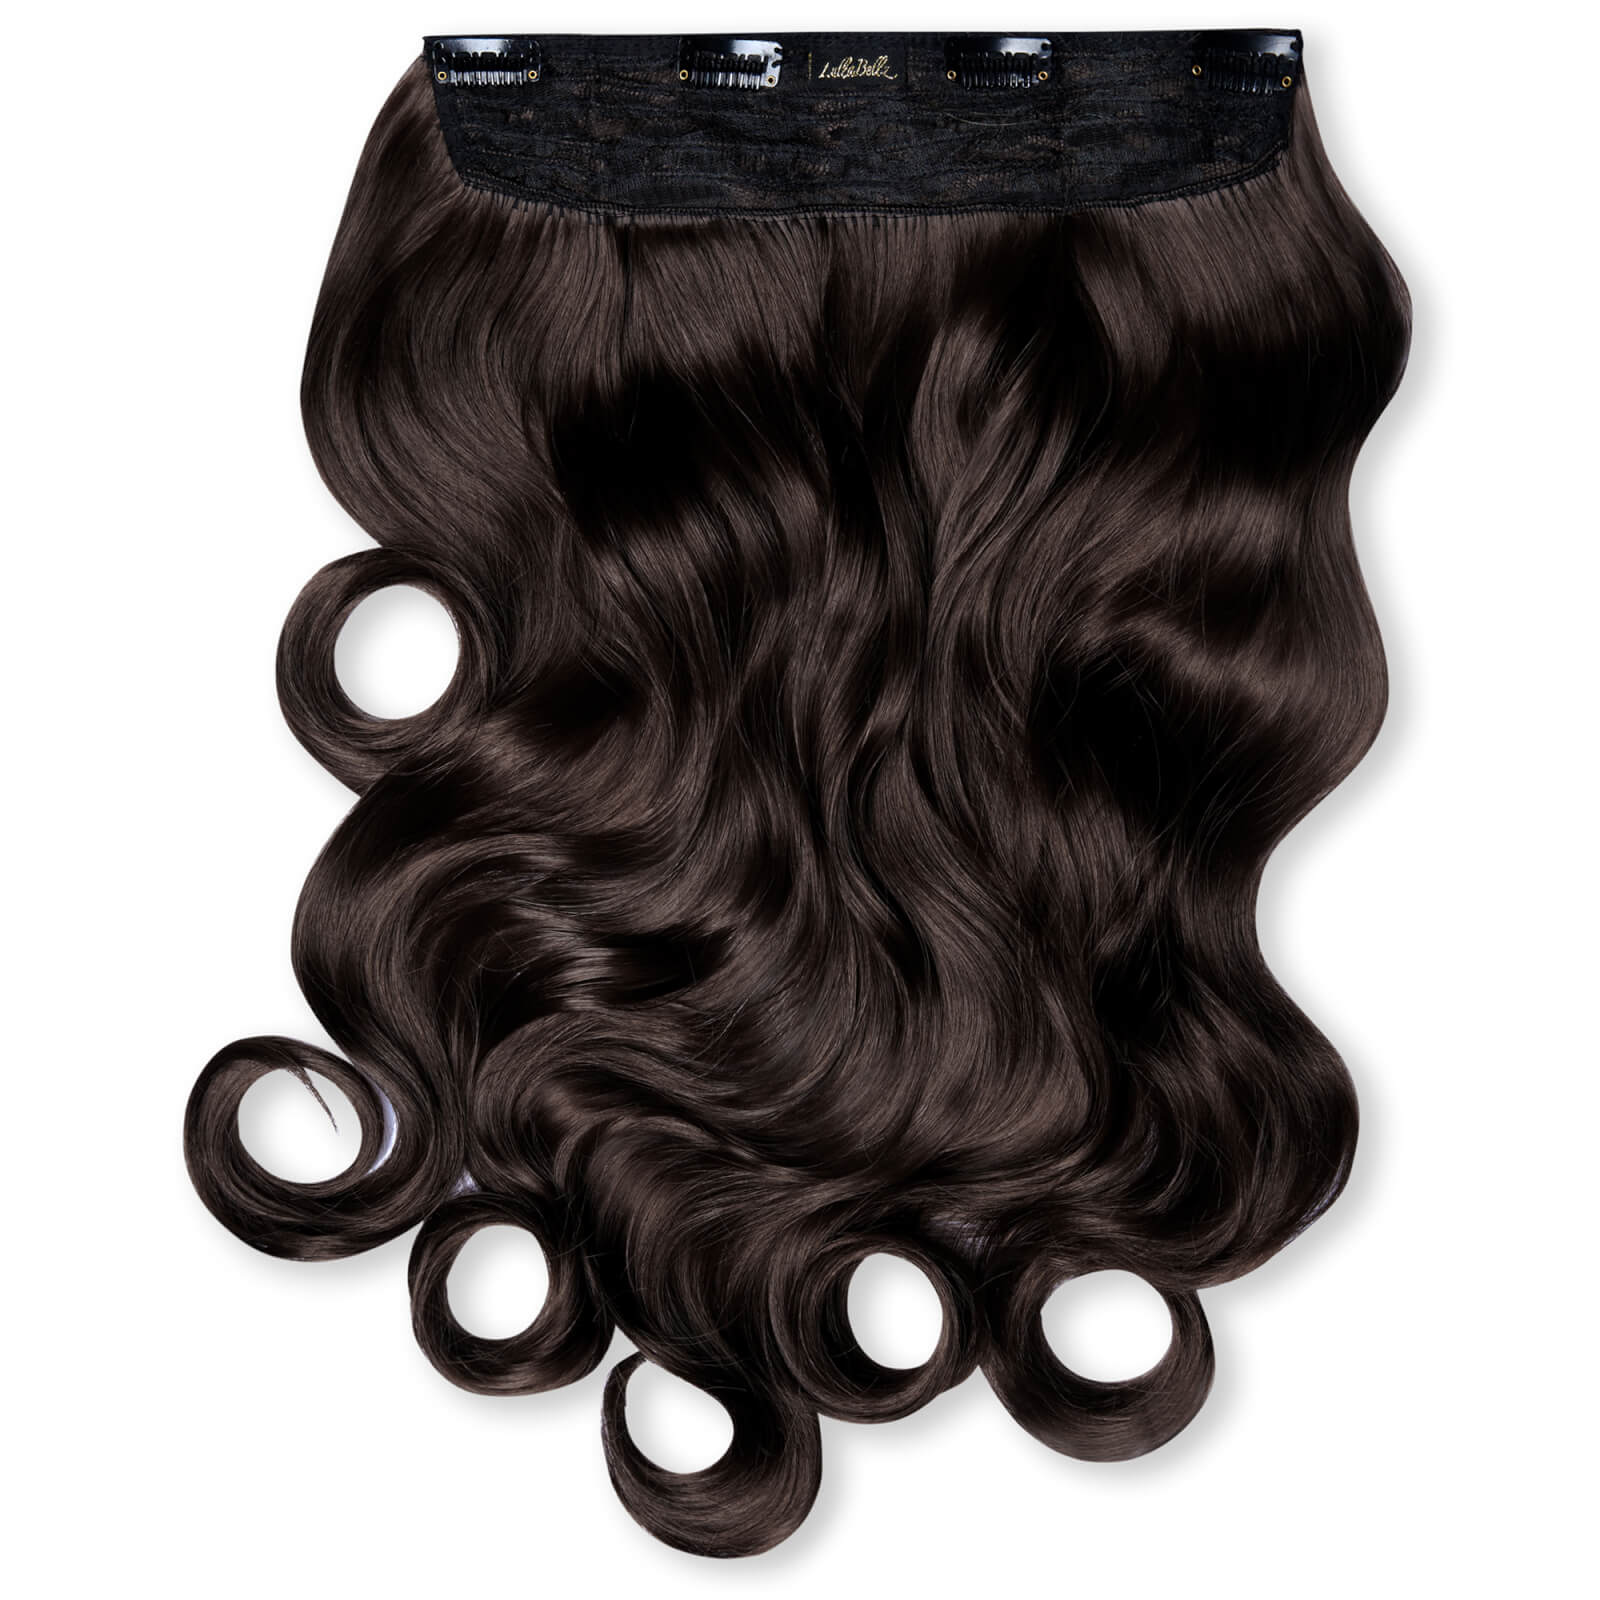 Image of LullaBellz Thick 20 1-Piece Curly Clip in Hair Extensions (Various Colours) - Dark Brown